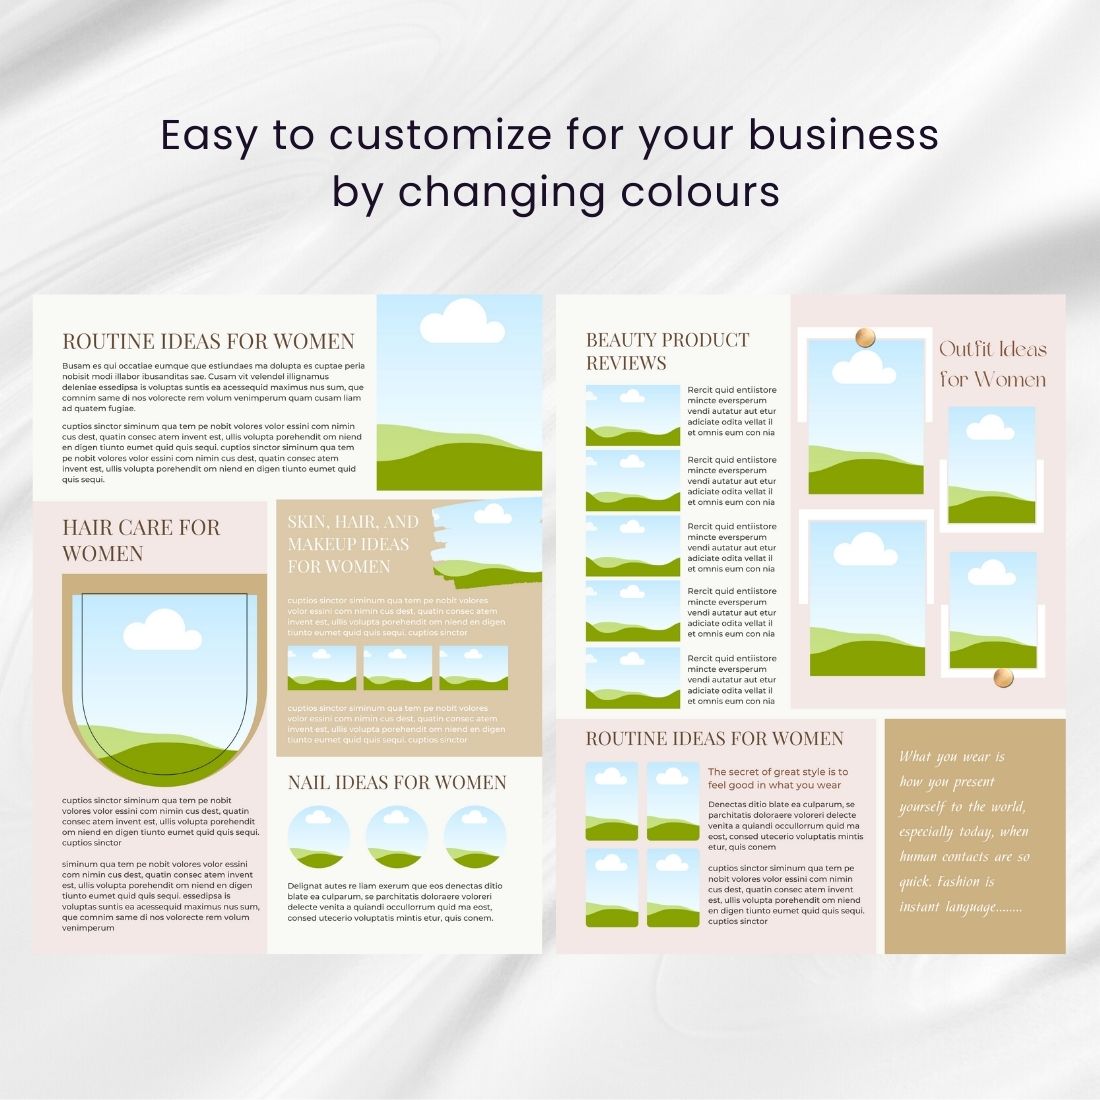 Easy to customize for your own business by changing colors.